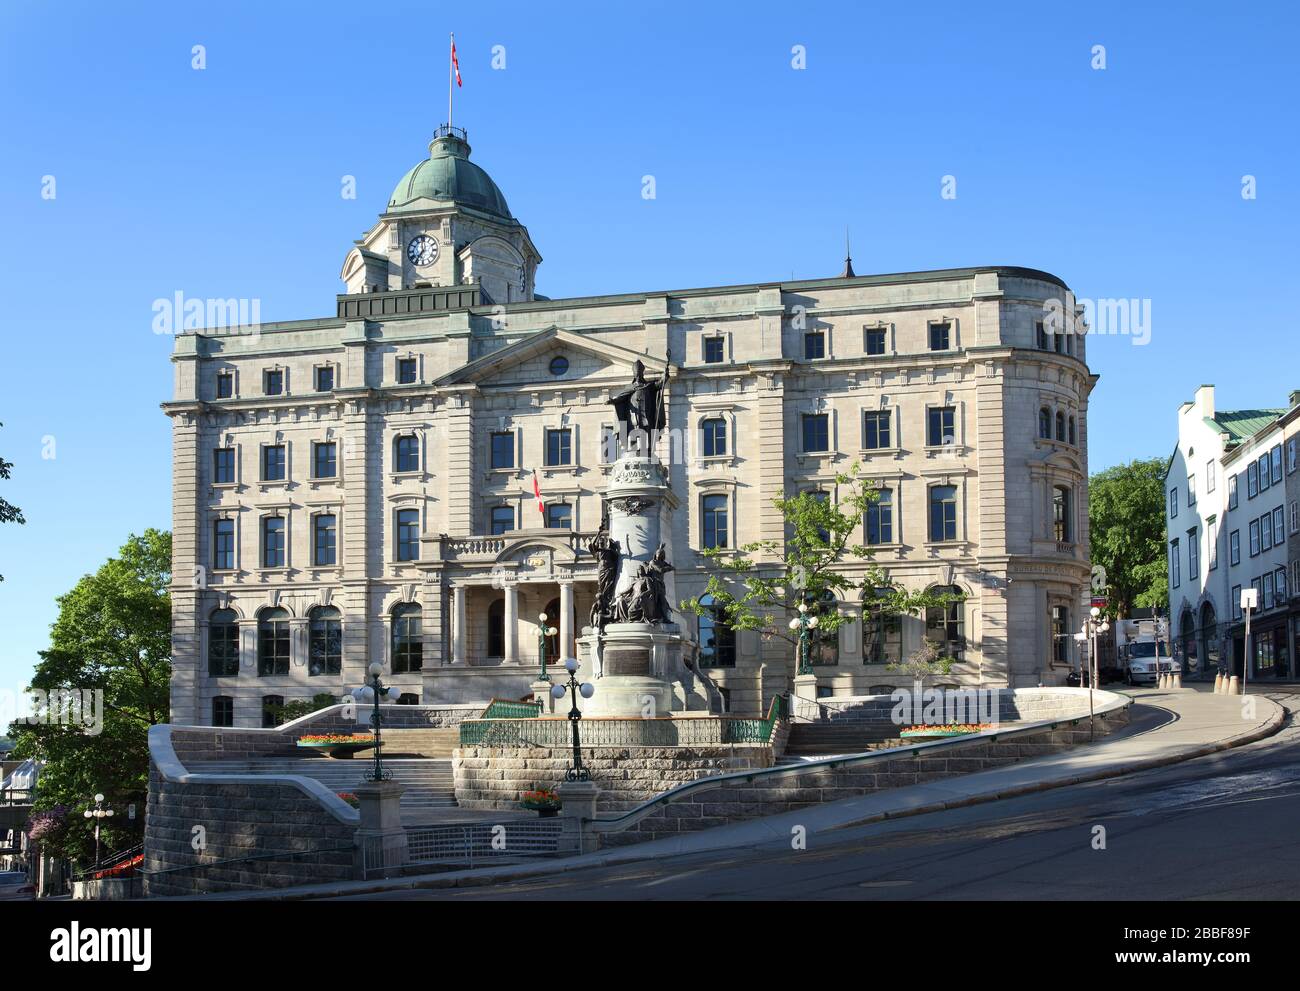 Second Empire-style building which originally served at Quebec City's central Post Office and continues to offer postal services in a smaller part of the building, Louis S. St-Laurent Building, Cote-de-la-Montagne, Quebec City, Province of Quebec, Canada Stock Photo